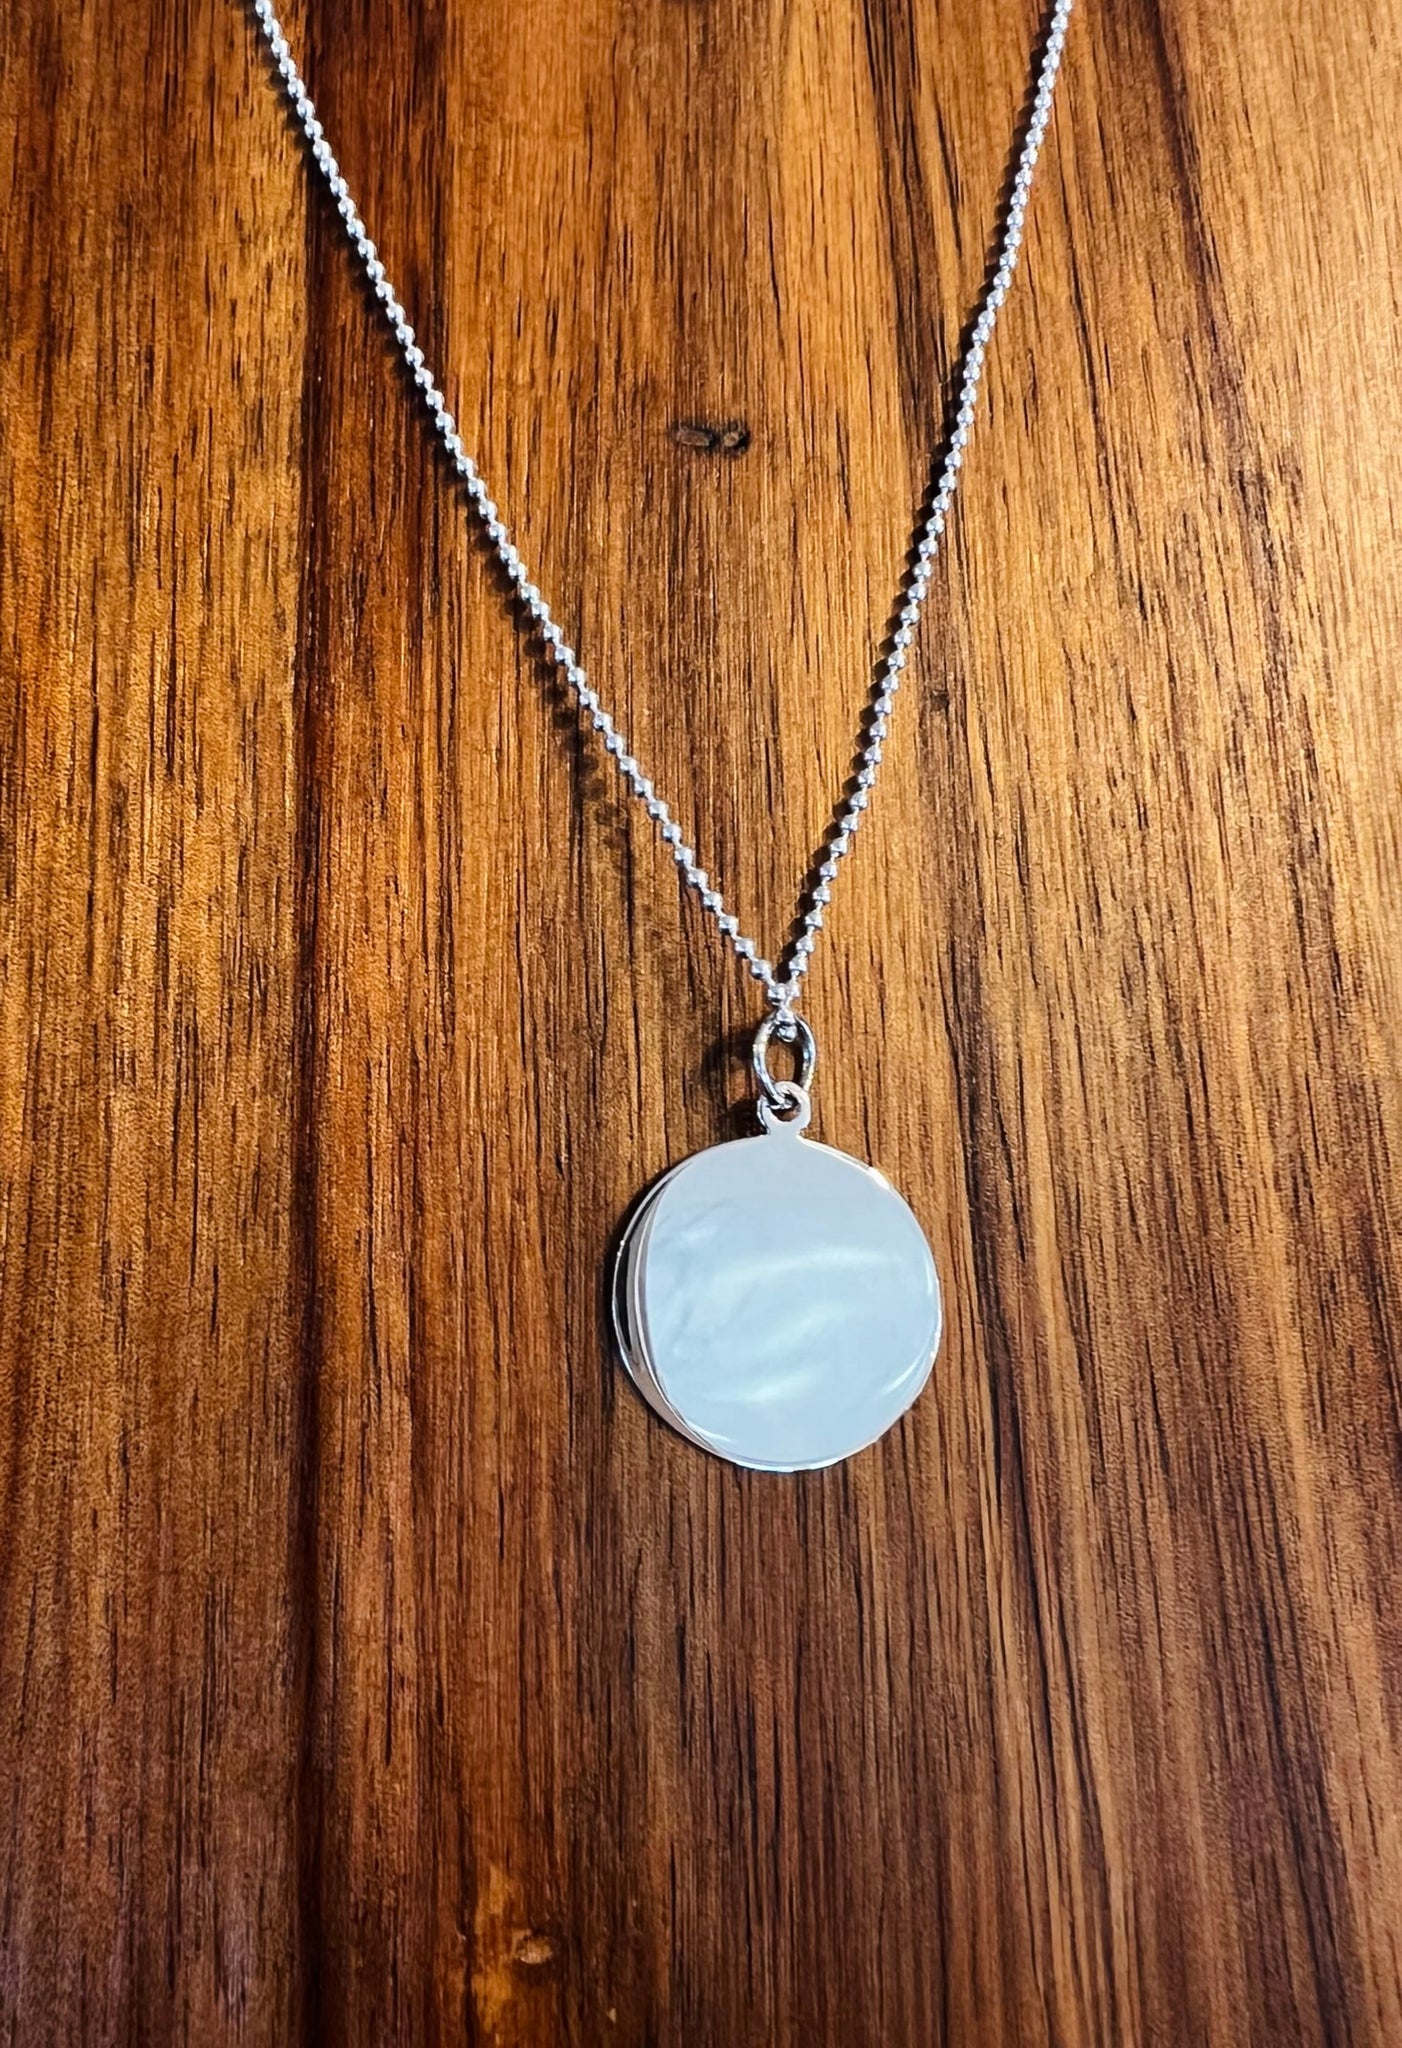 ¾" Disc Necklace